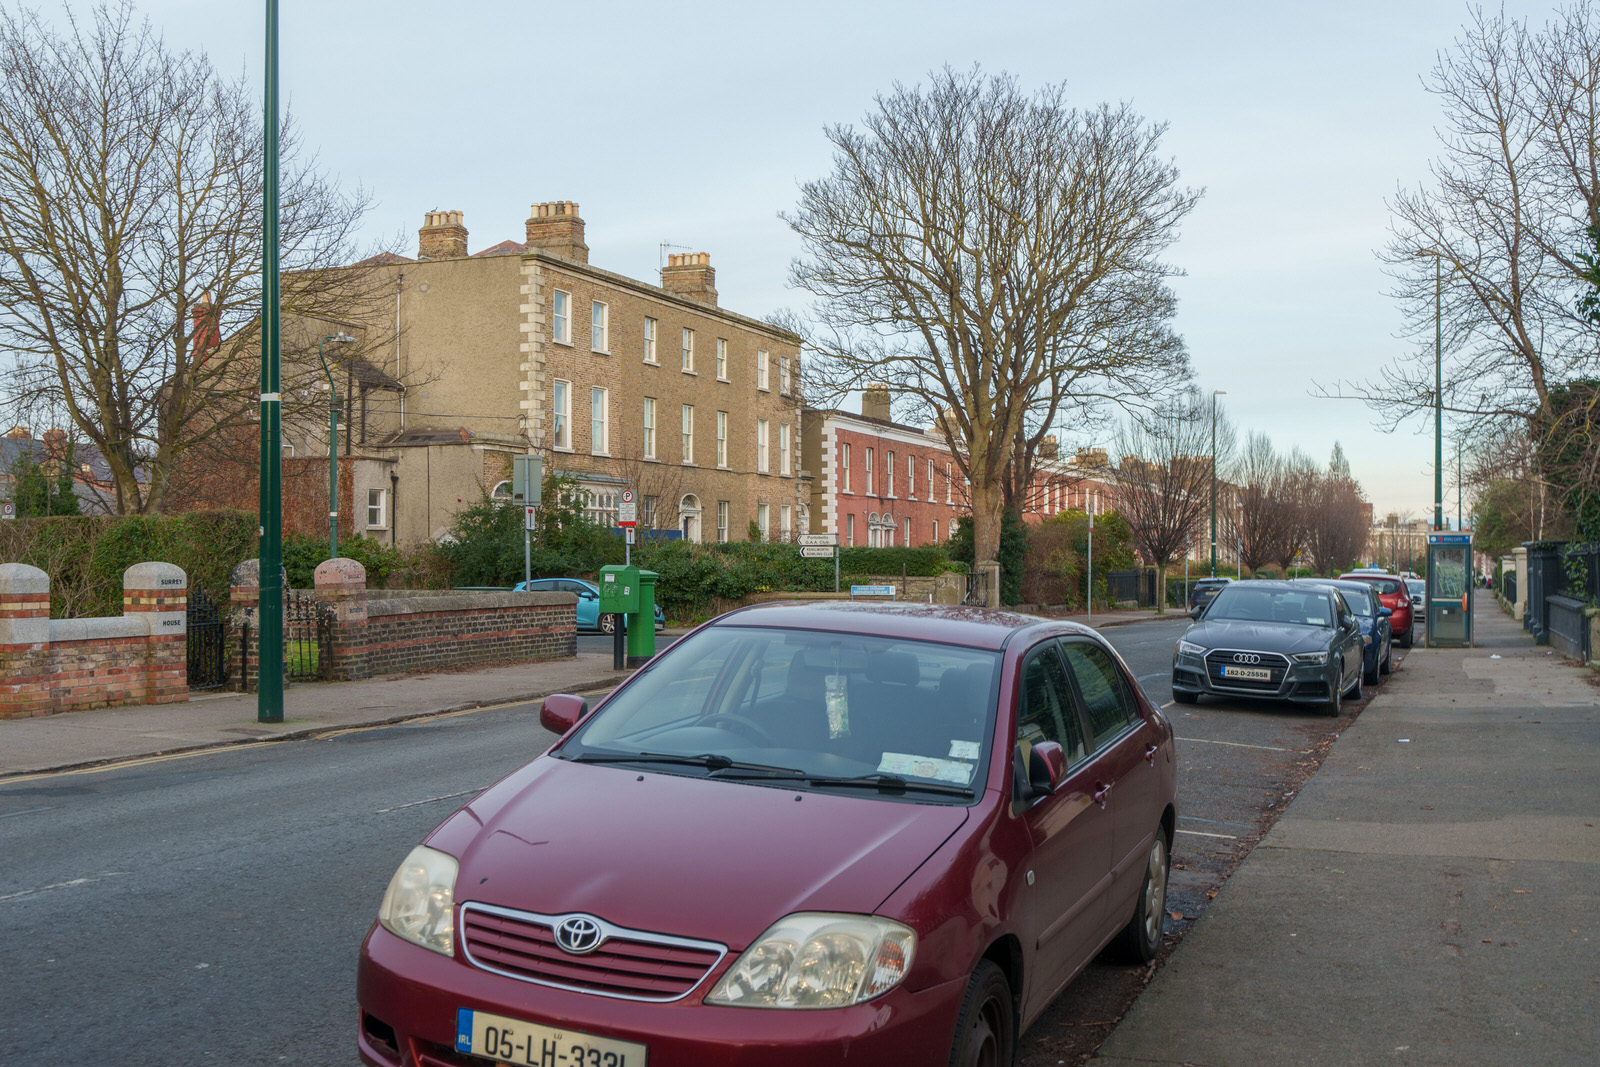 EXPLORING LEINSTER ROAD [THERE WAS EVEN A CHERRY BLOSSOM IN FLOWER]-227260-1